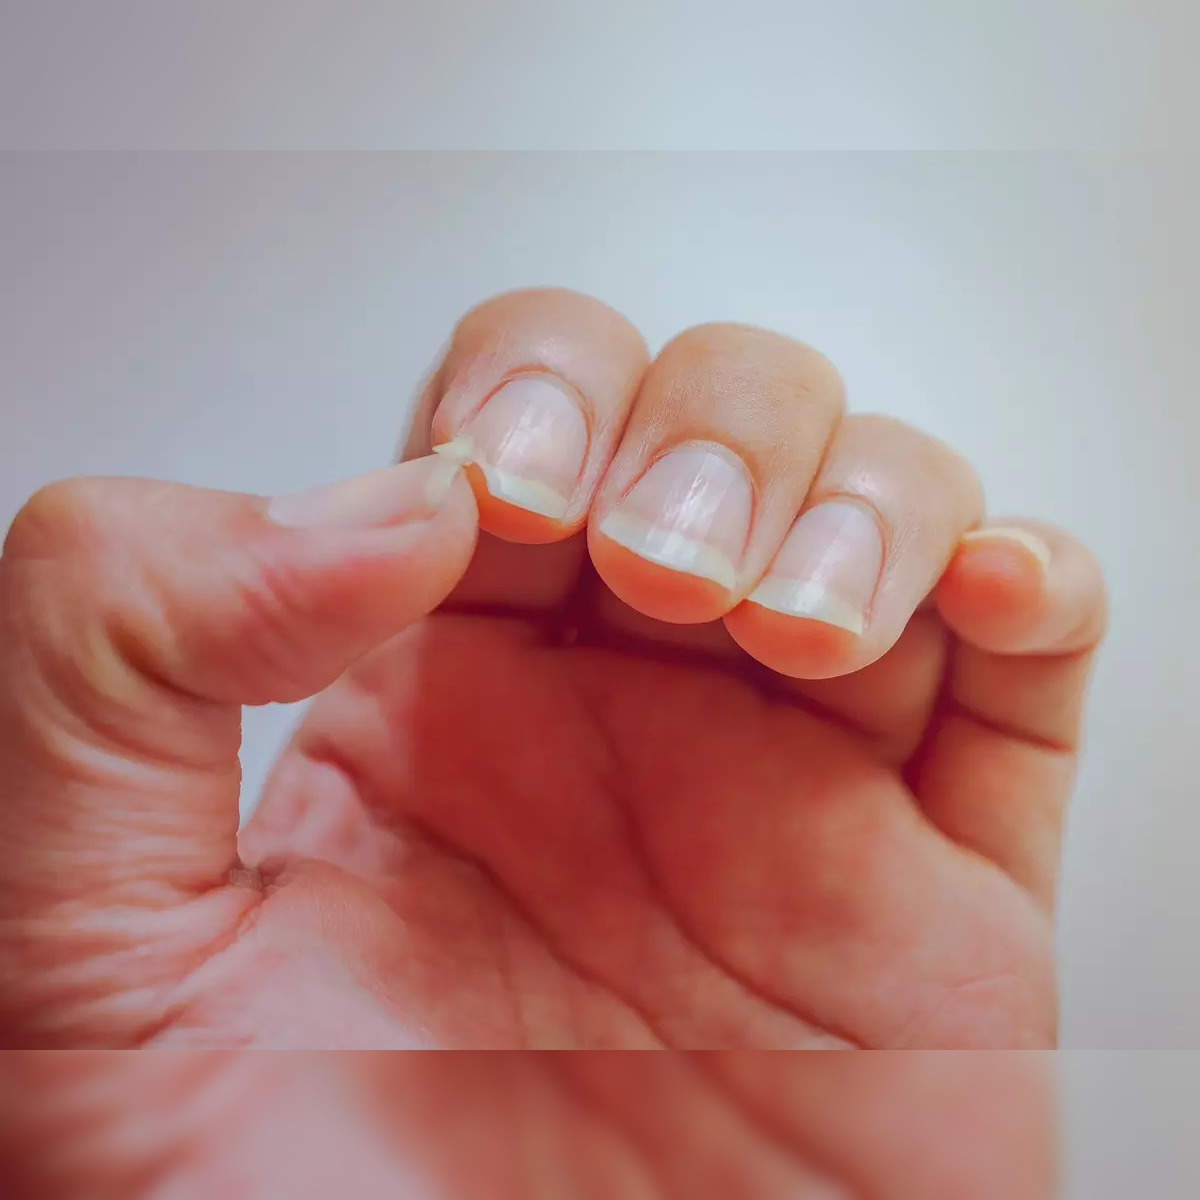 A Fast Cure To Strengthen Brittle Nails | Footfiles